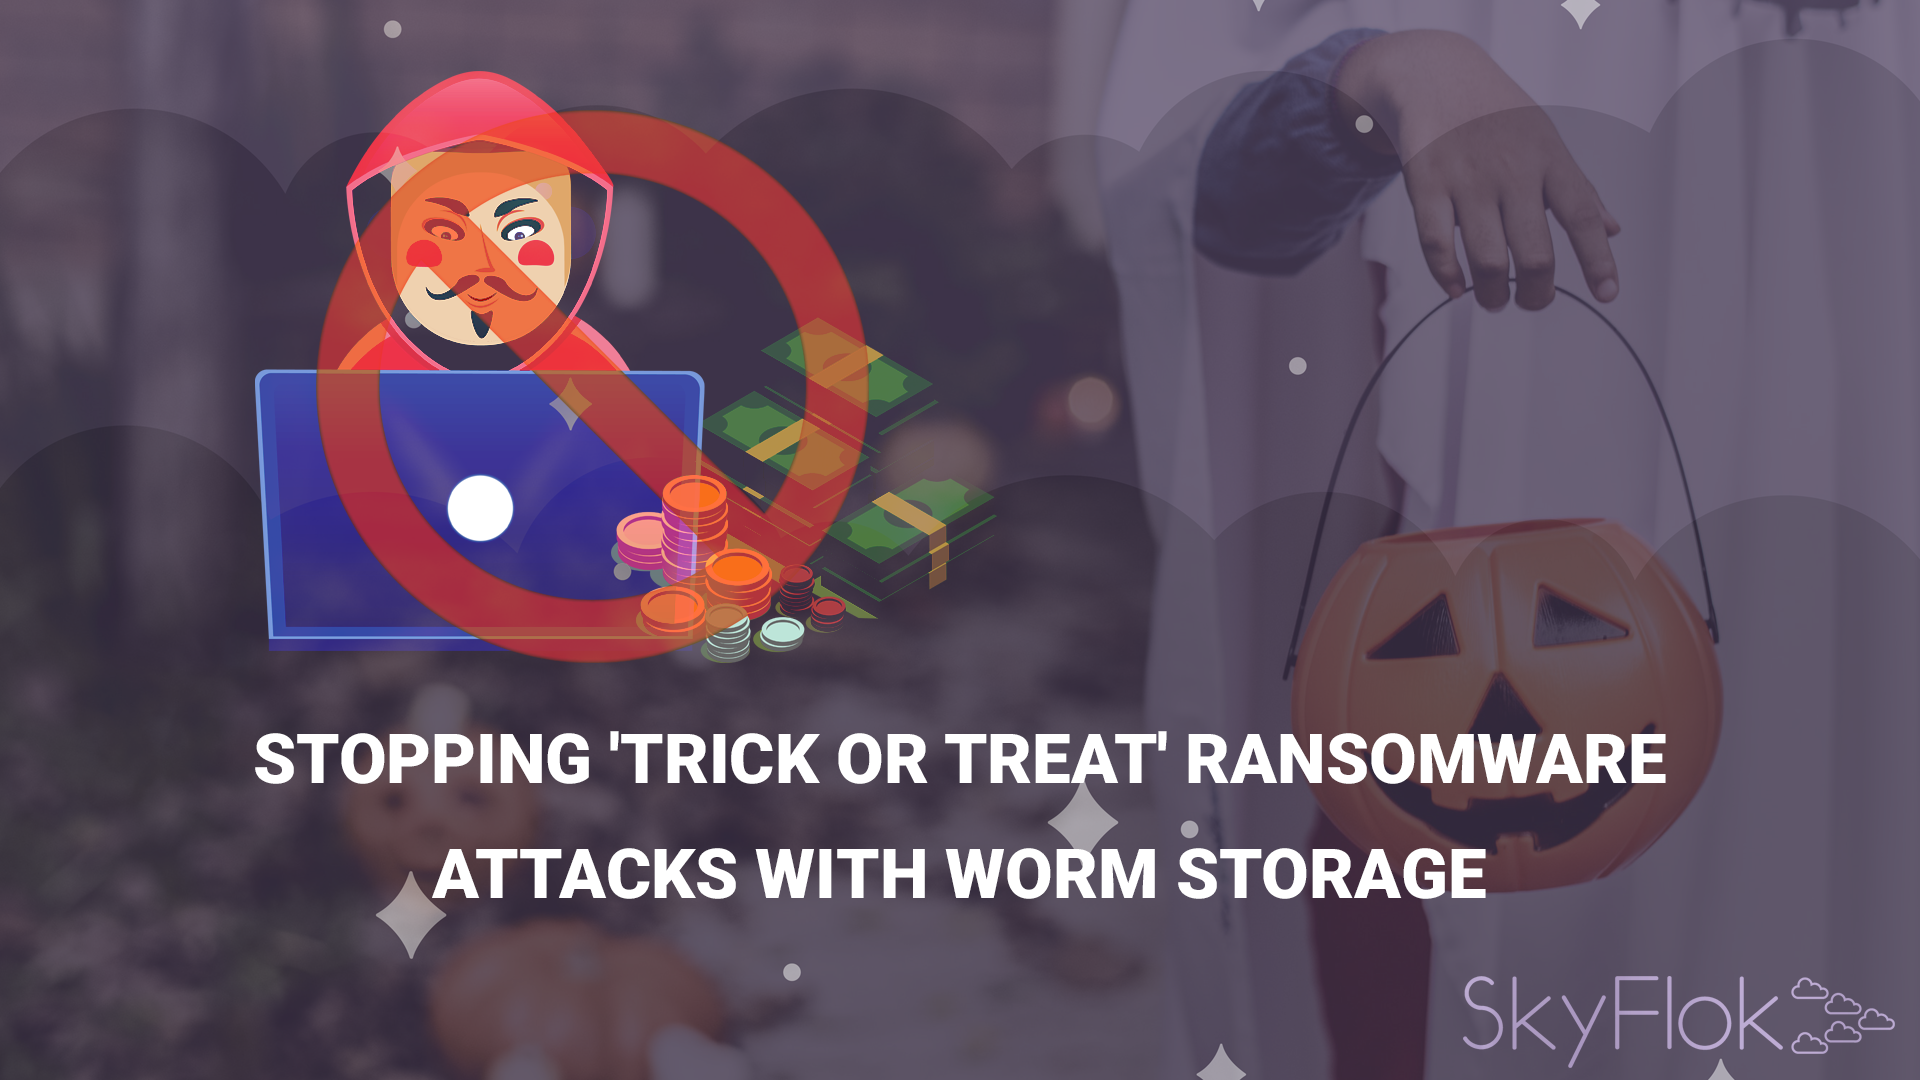 You are currently viewing Stopping ‘Trick or Treat’ Ransomware Attacks